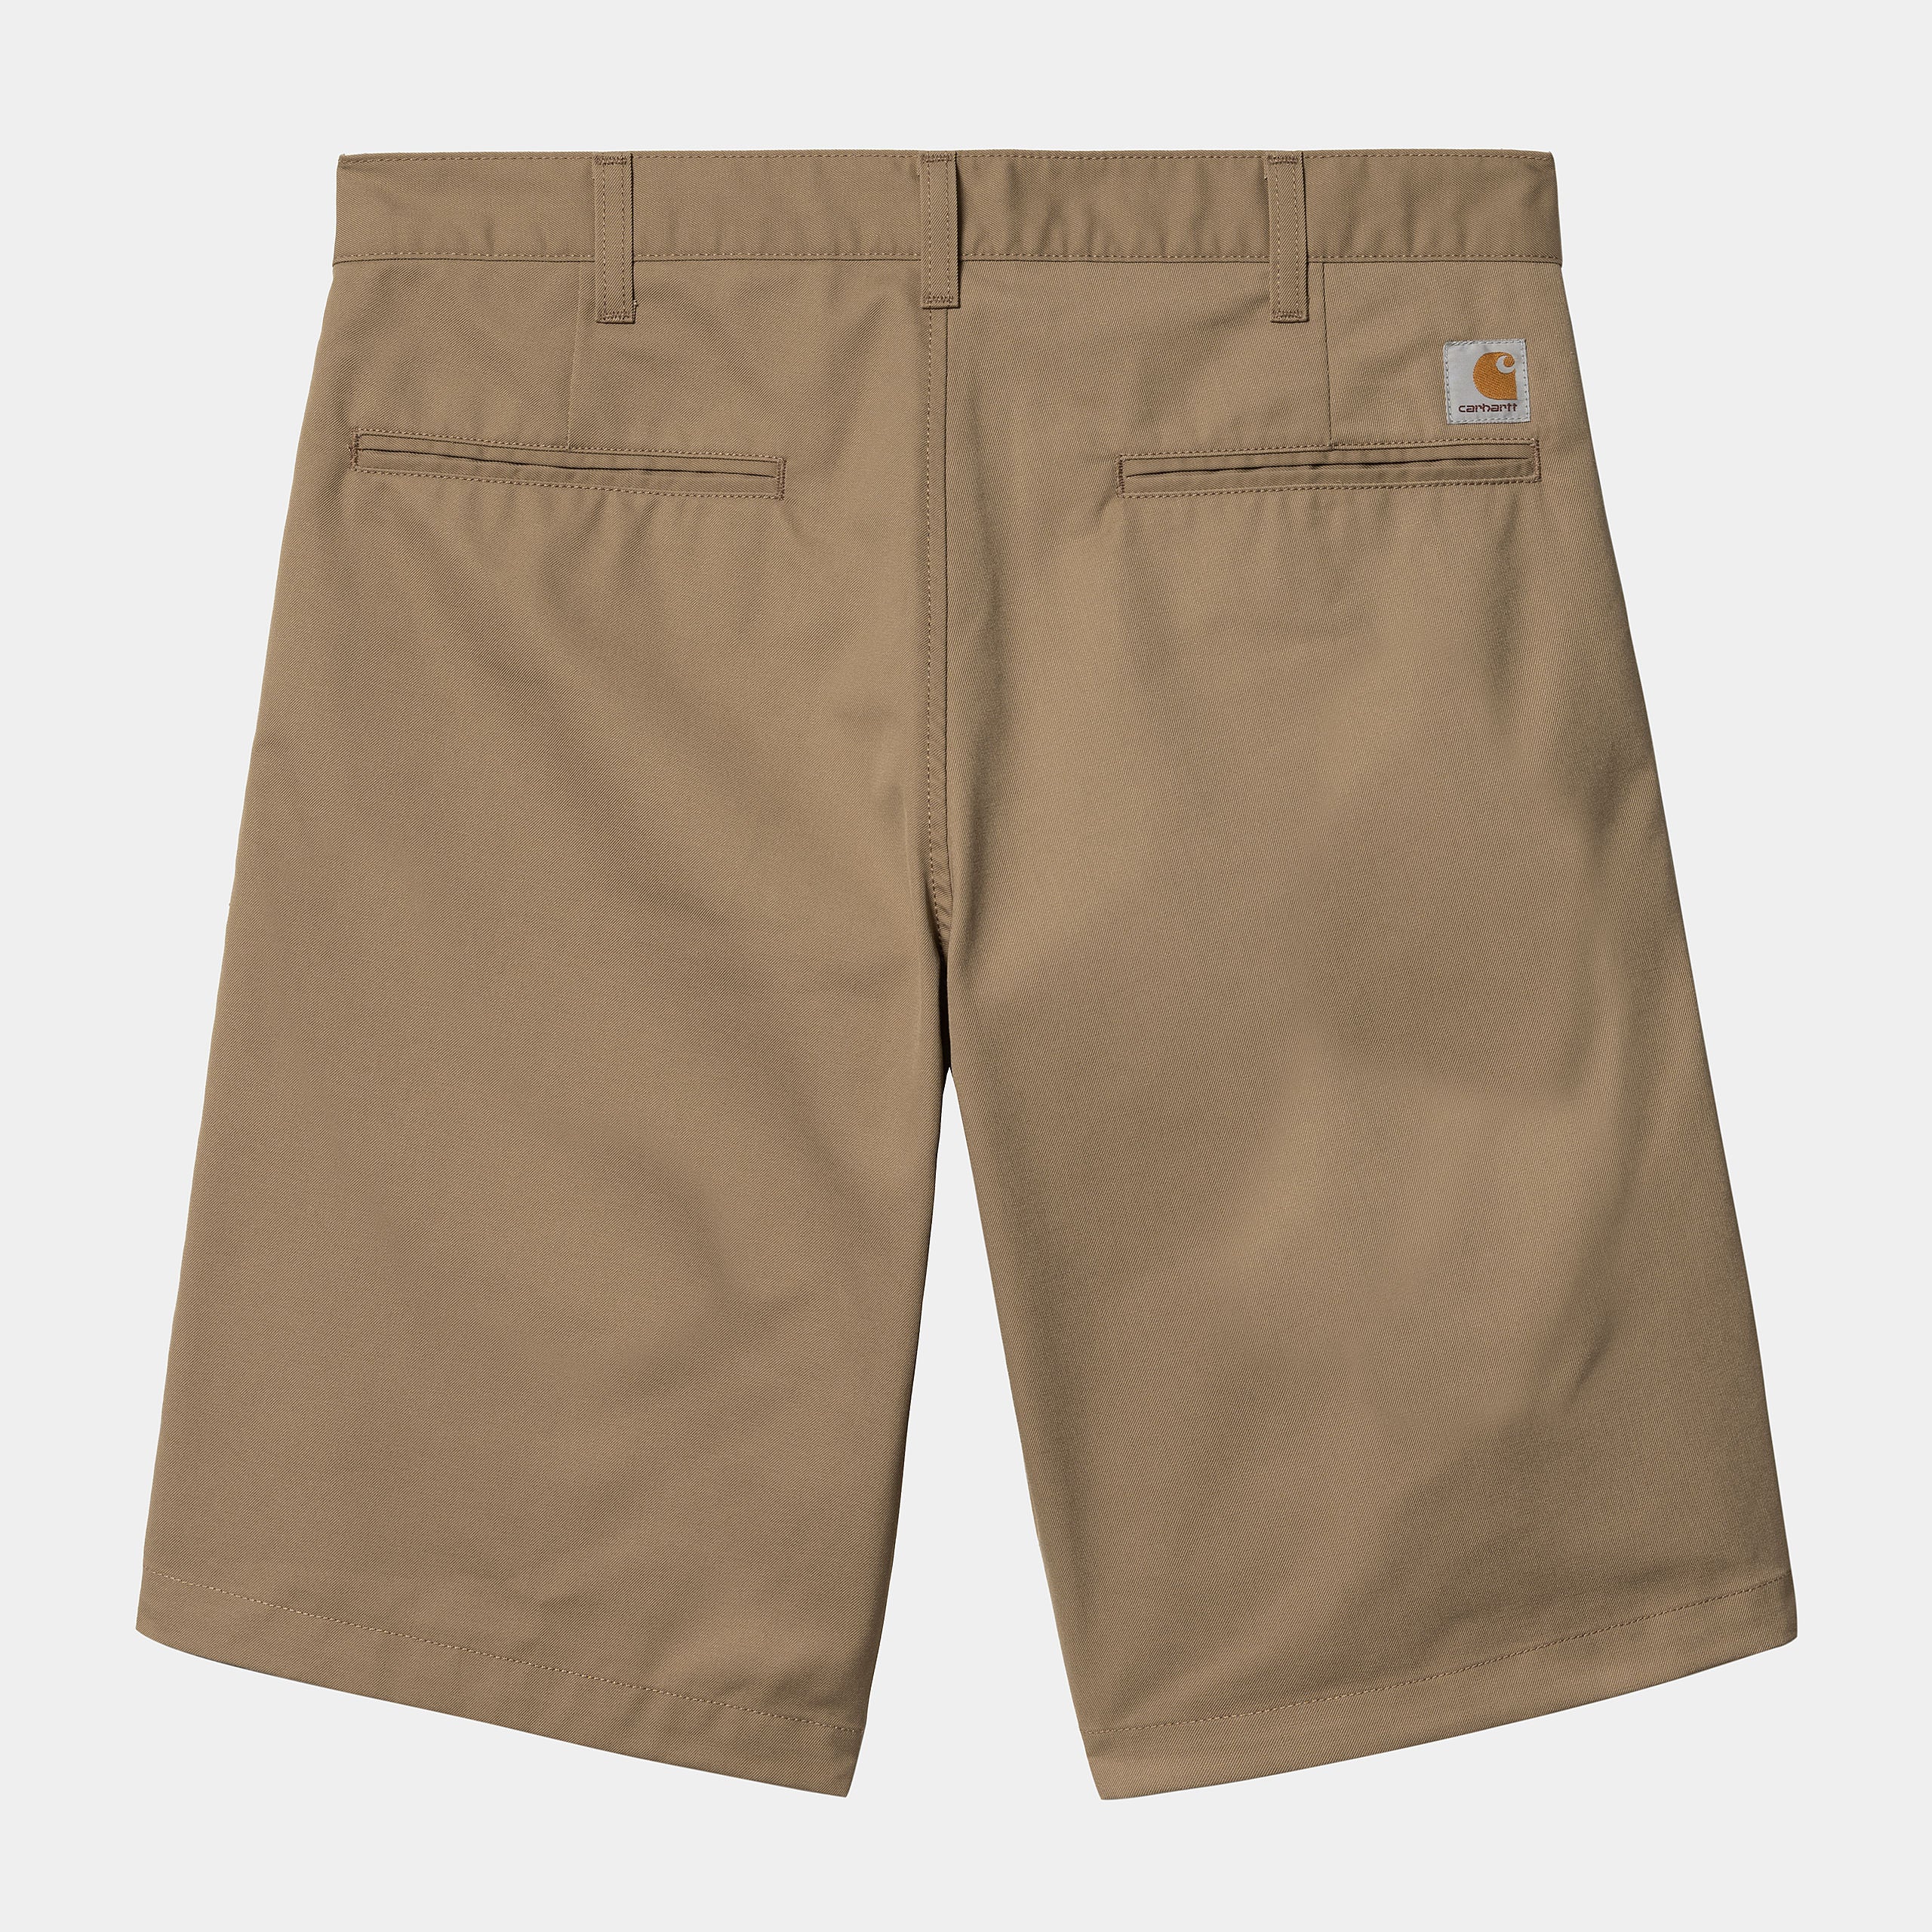 Carhartt WIP Mens Presenter Shorts - Leather Rinsed